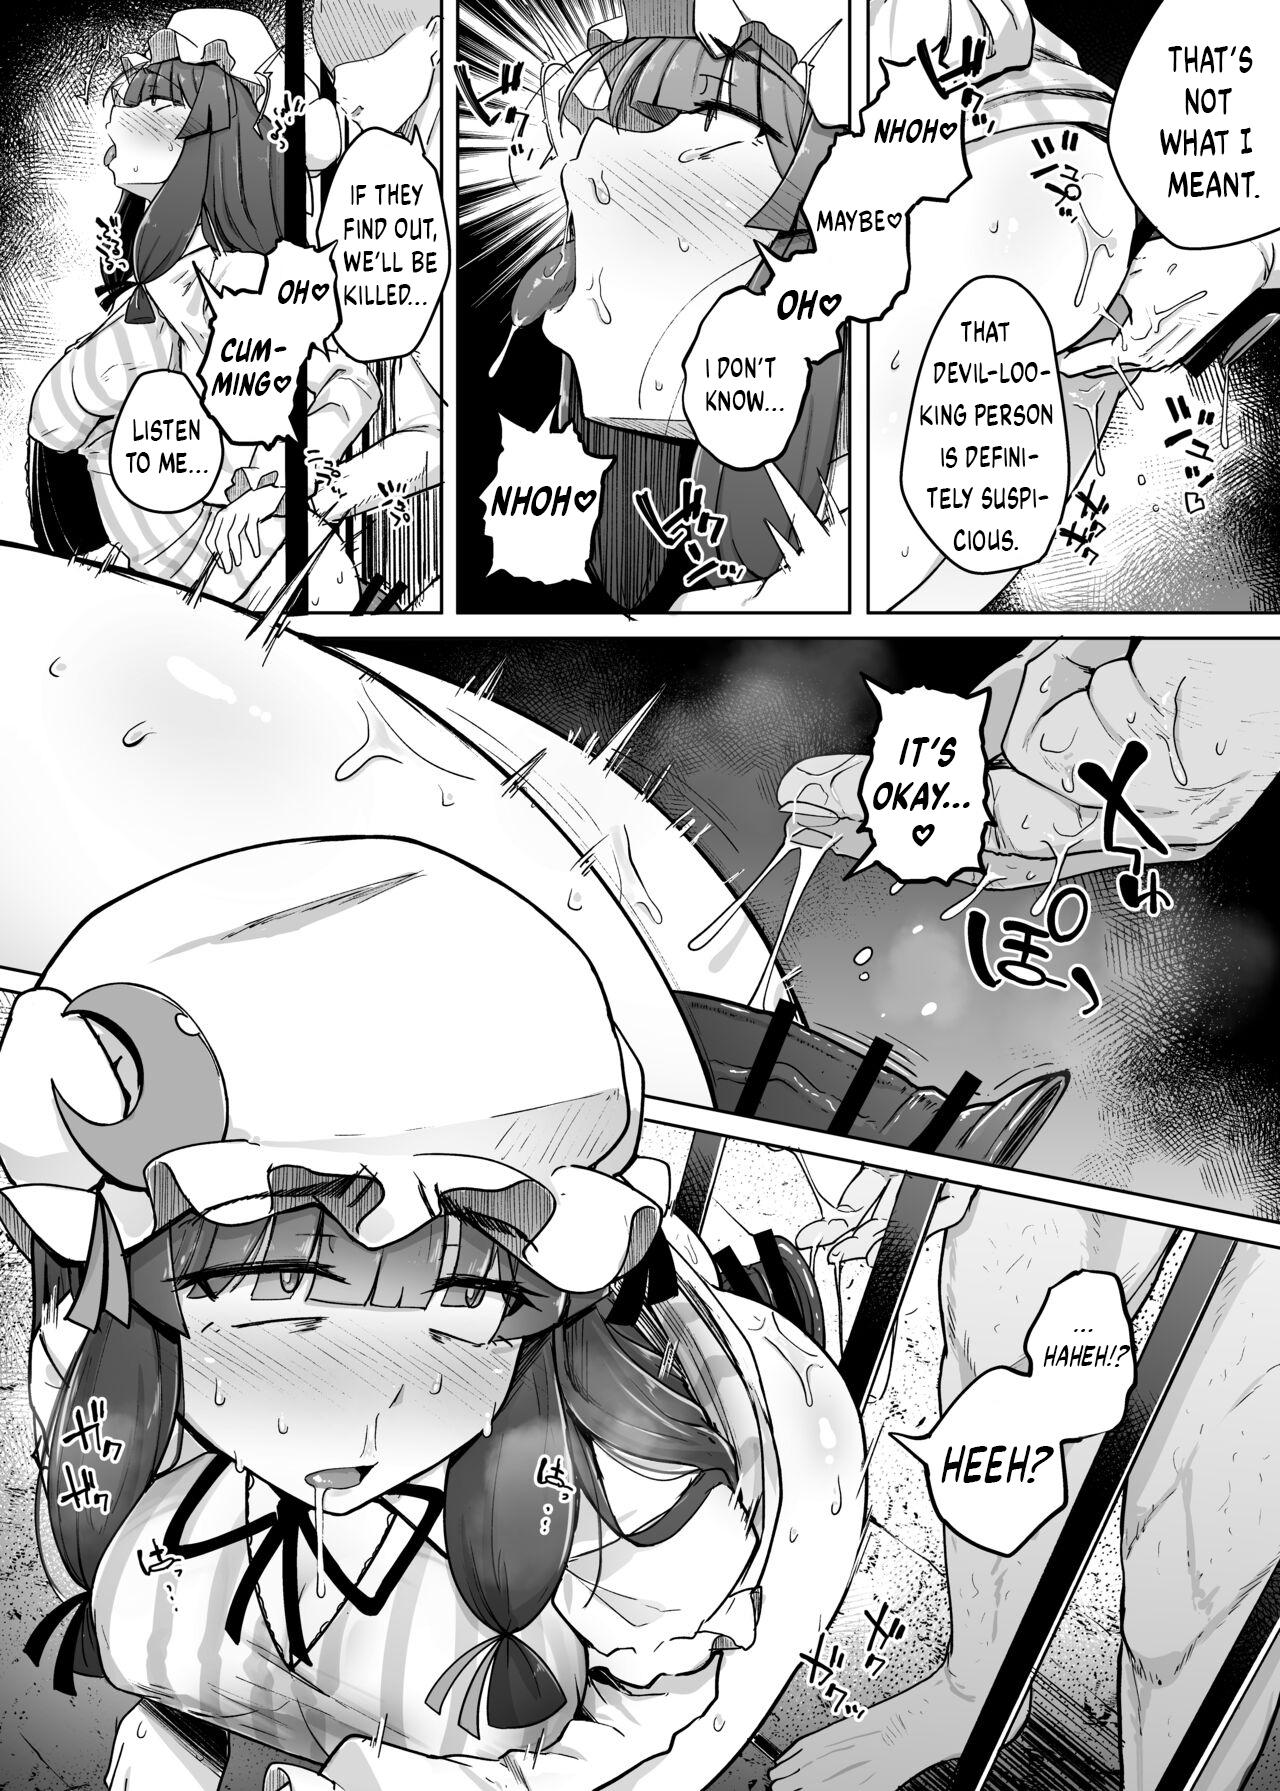 Nylon Ana to Muttsuri Dosukebe Daitoshokan 5 | The Hole and the Closet Perverted Unmoving Great Library 5 - Touhou project Porno Amateur - Page 8